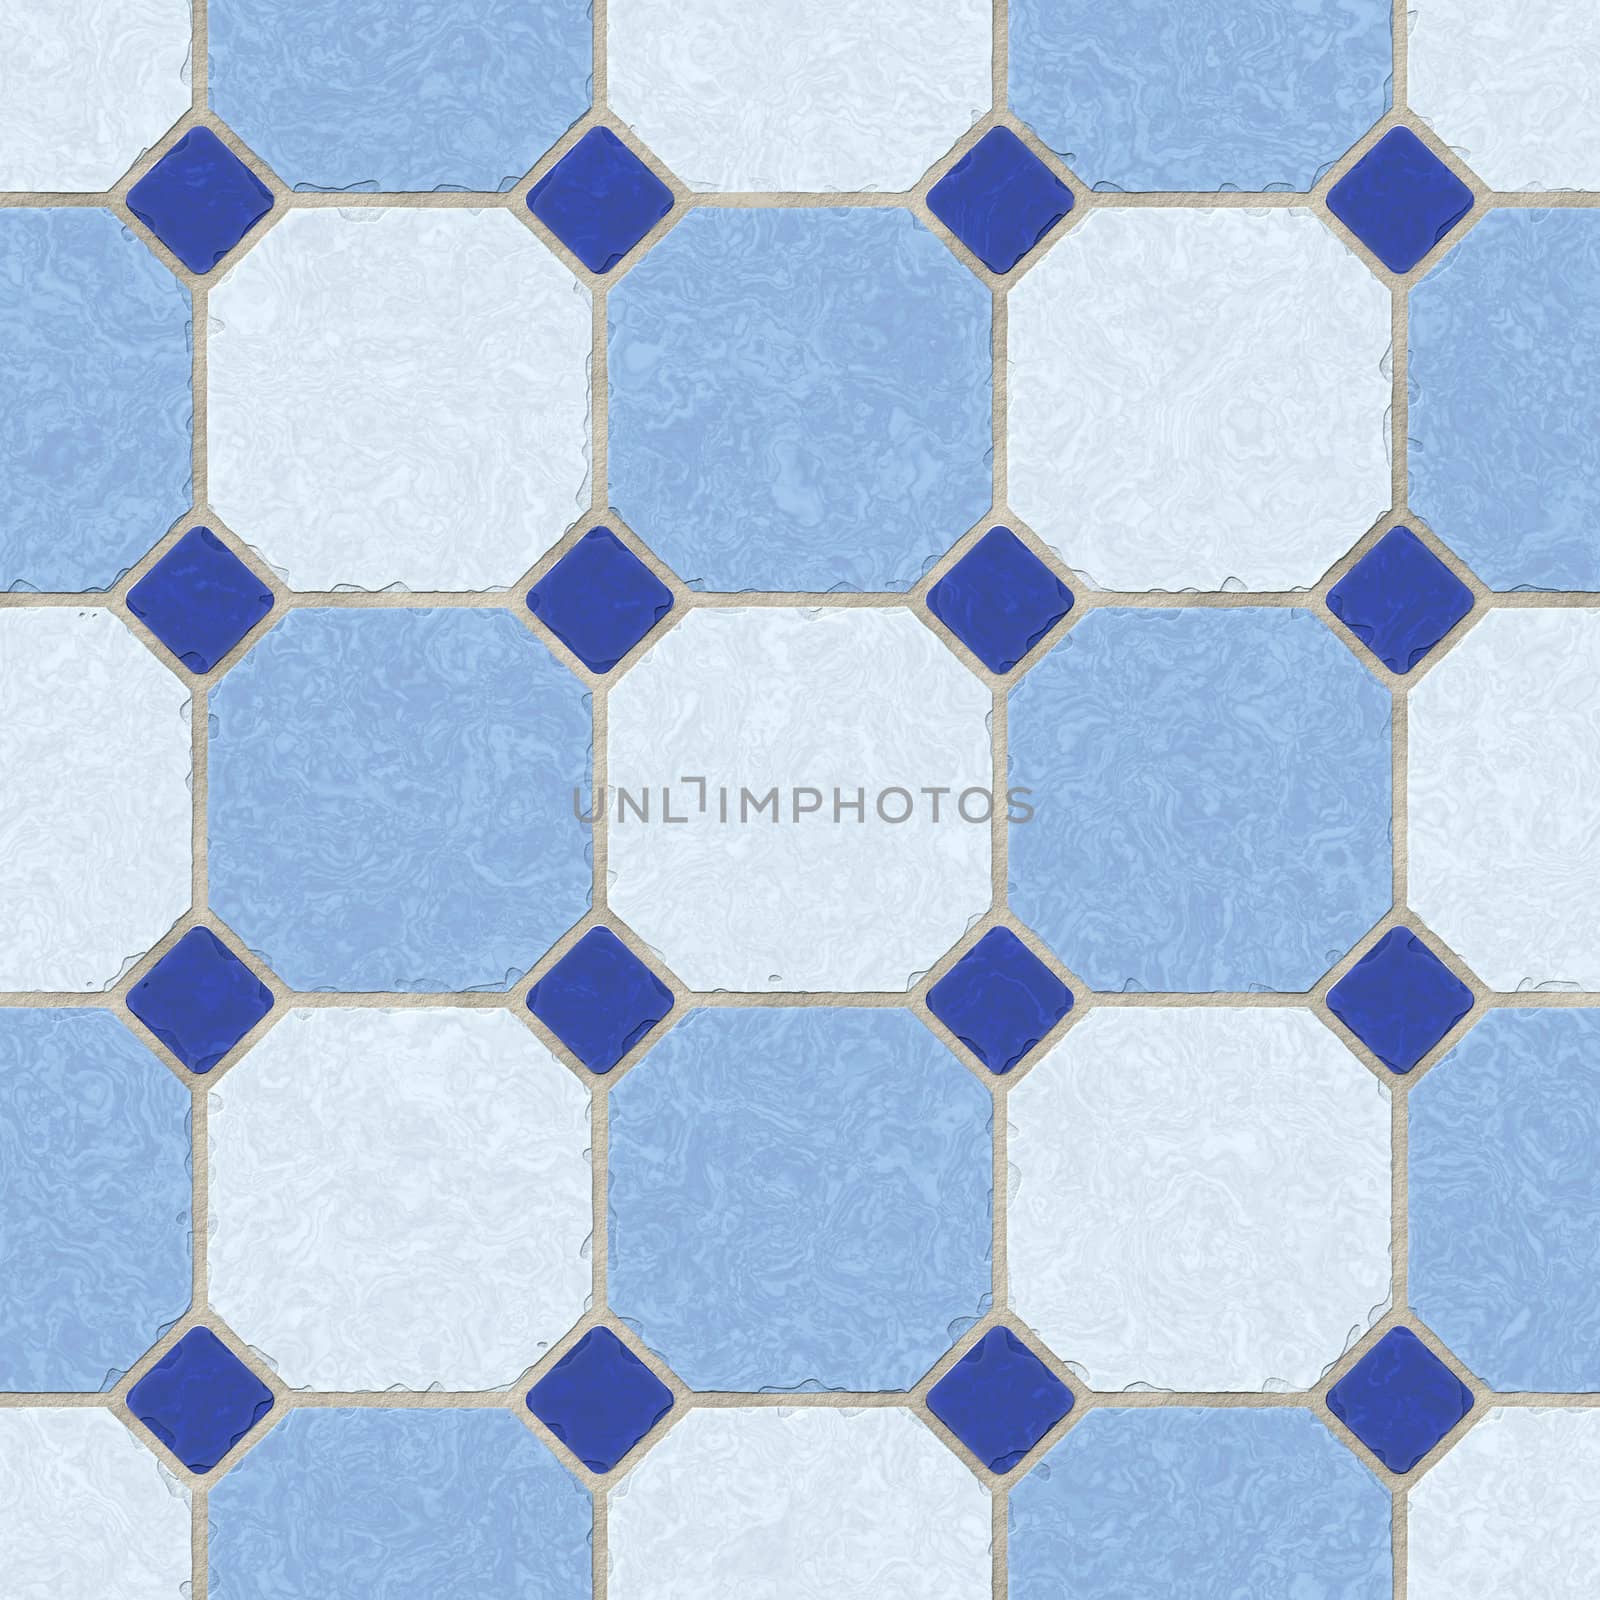 great image of a marble tiled floor